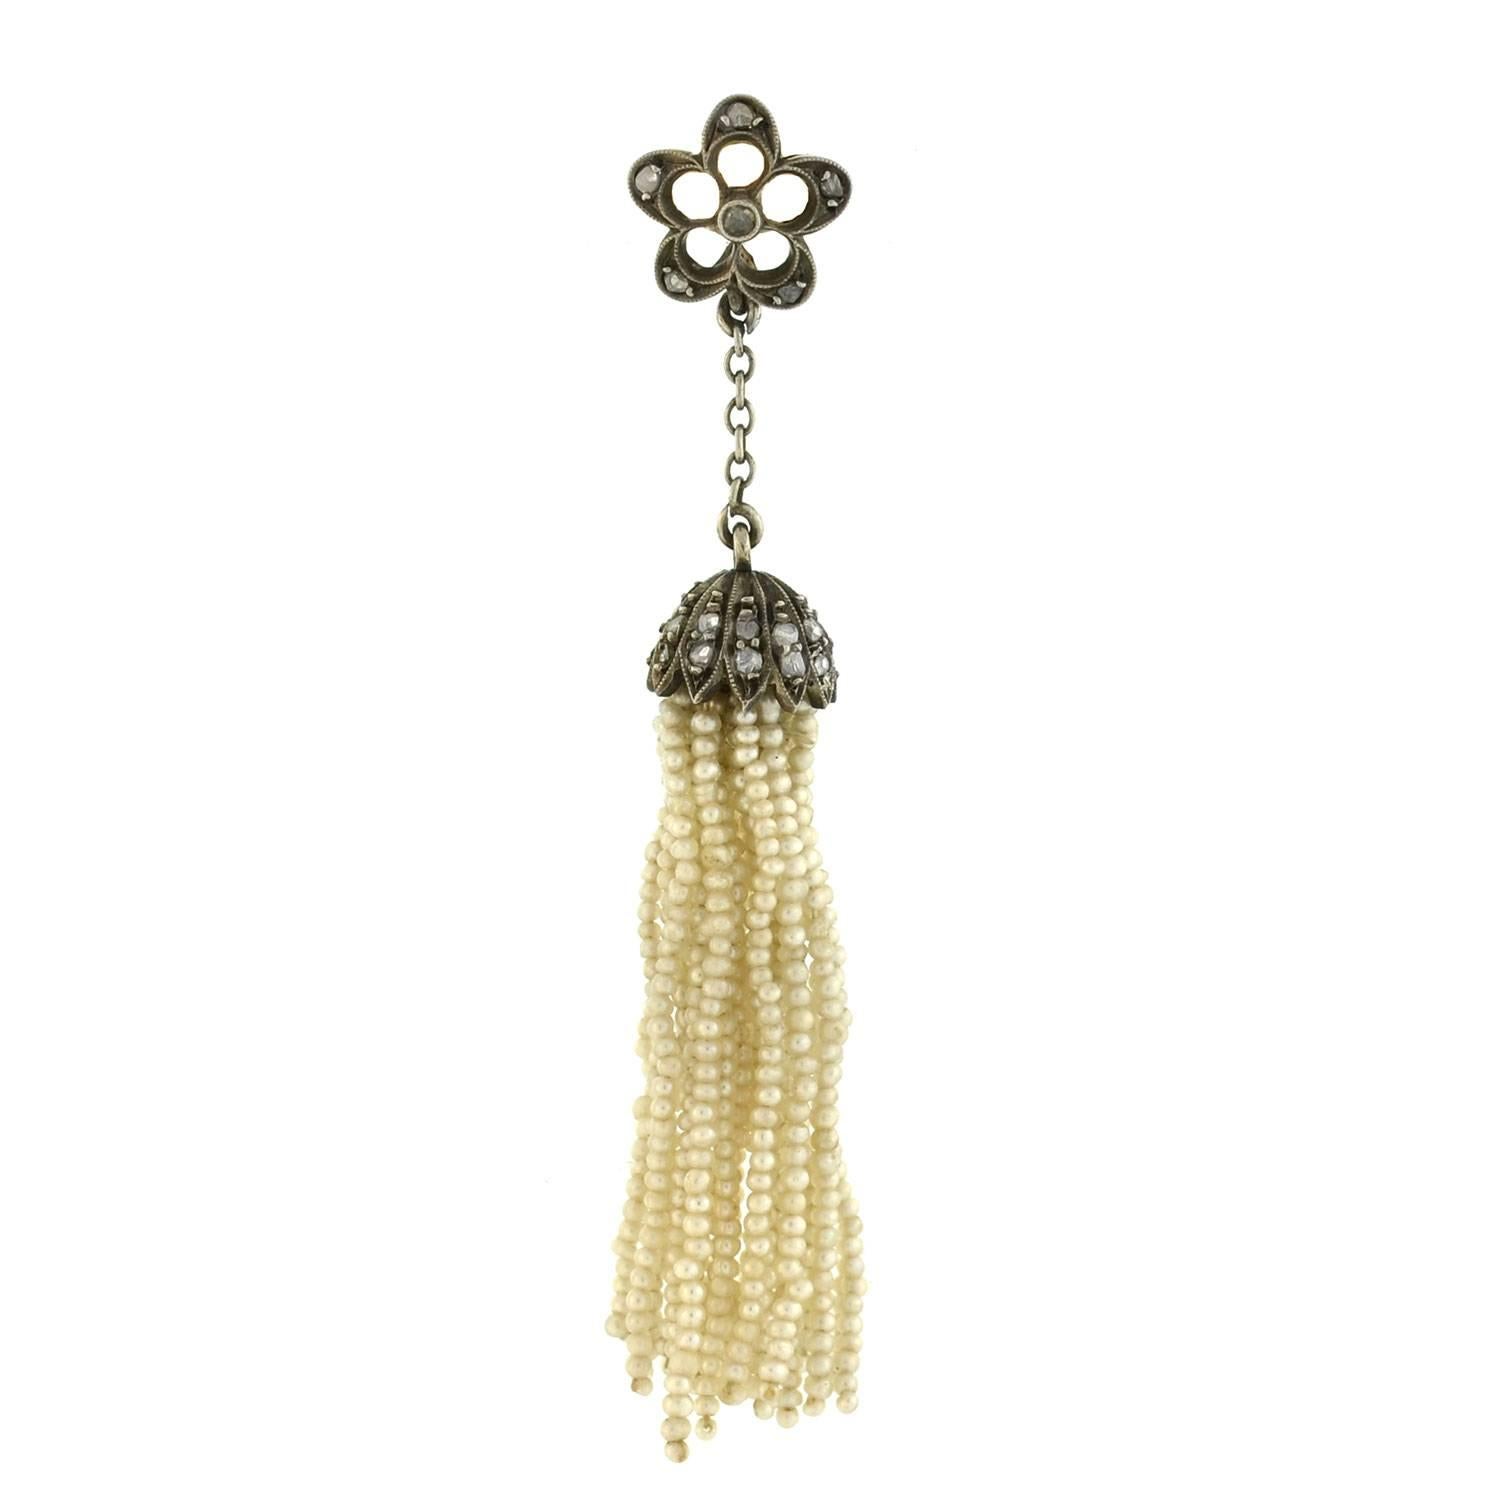 Stunning and unusual pearl earrings from the Victorian (ca1880) era! These fabulous earrings are crafted in sterling silver and 14kt yellow gold and have an interesting chandelier-like design. Each begins with a sterling topped 14kt gold open